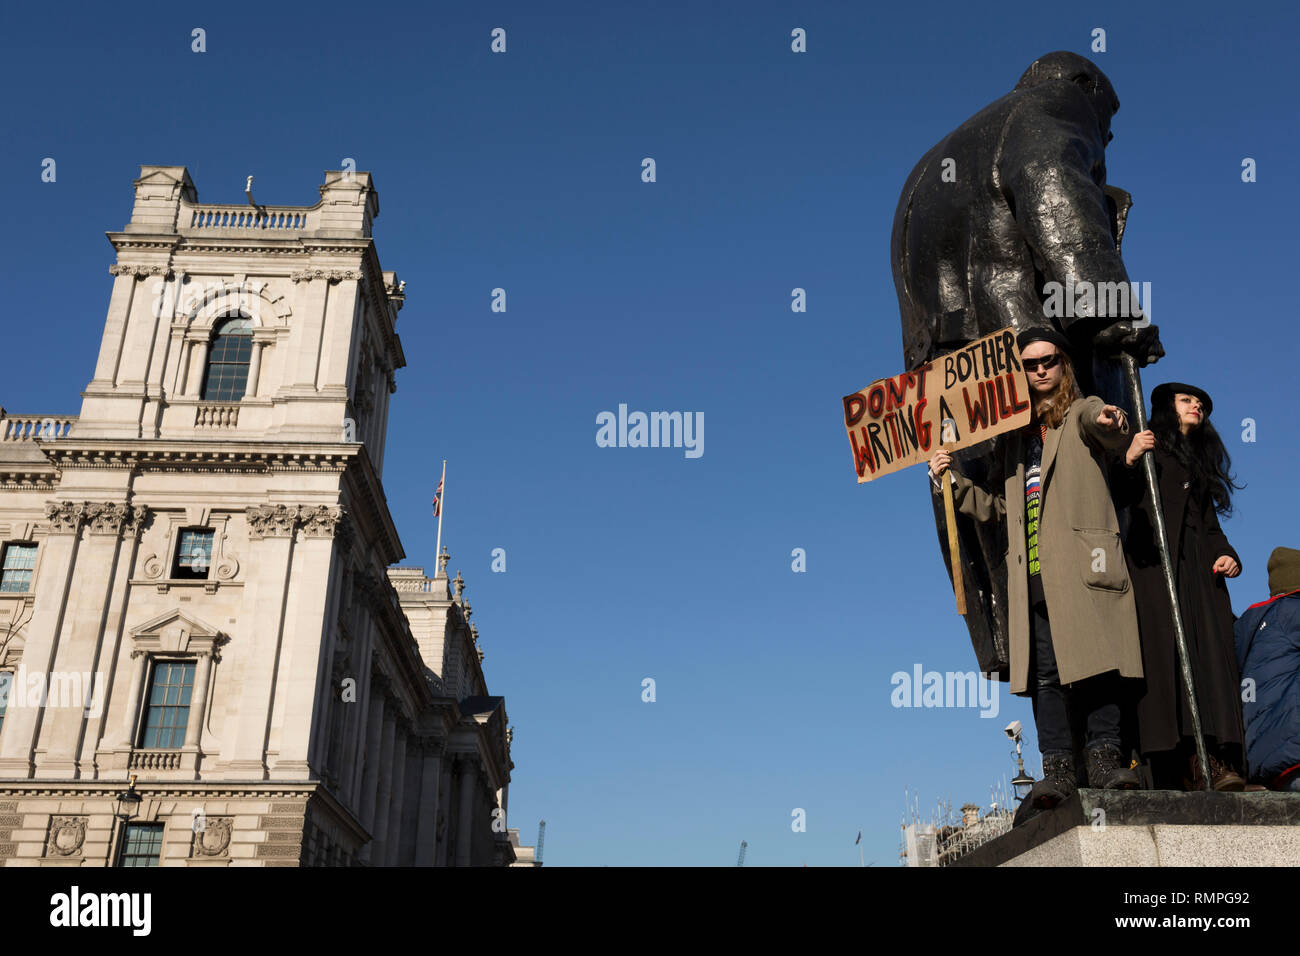 London, UK. 15th Feb, 2019.  Inspired by Swedish teenager Greta Thunberg and organised by Youth Strike 4 Climate, British eco-aware school and college-age pupils protest about Climate Change stand on the statue of Winston Churchill in Parliament Square during their walkout from classes, on 15th February 2019, in Westminster, London England. Photo by Richard Baker / Alamy Live News Credit: RichardBaker/Alamy Live News Stock Photo